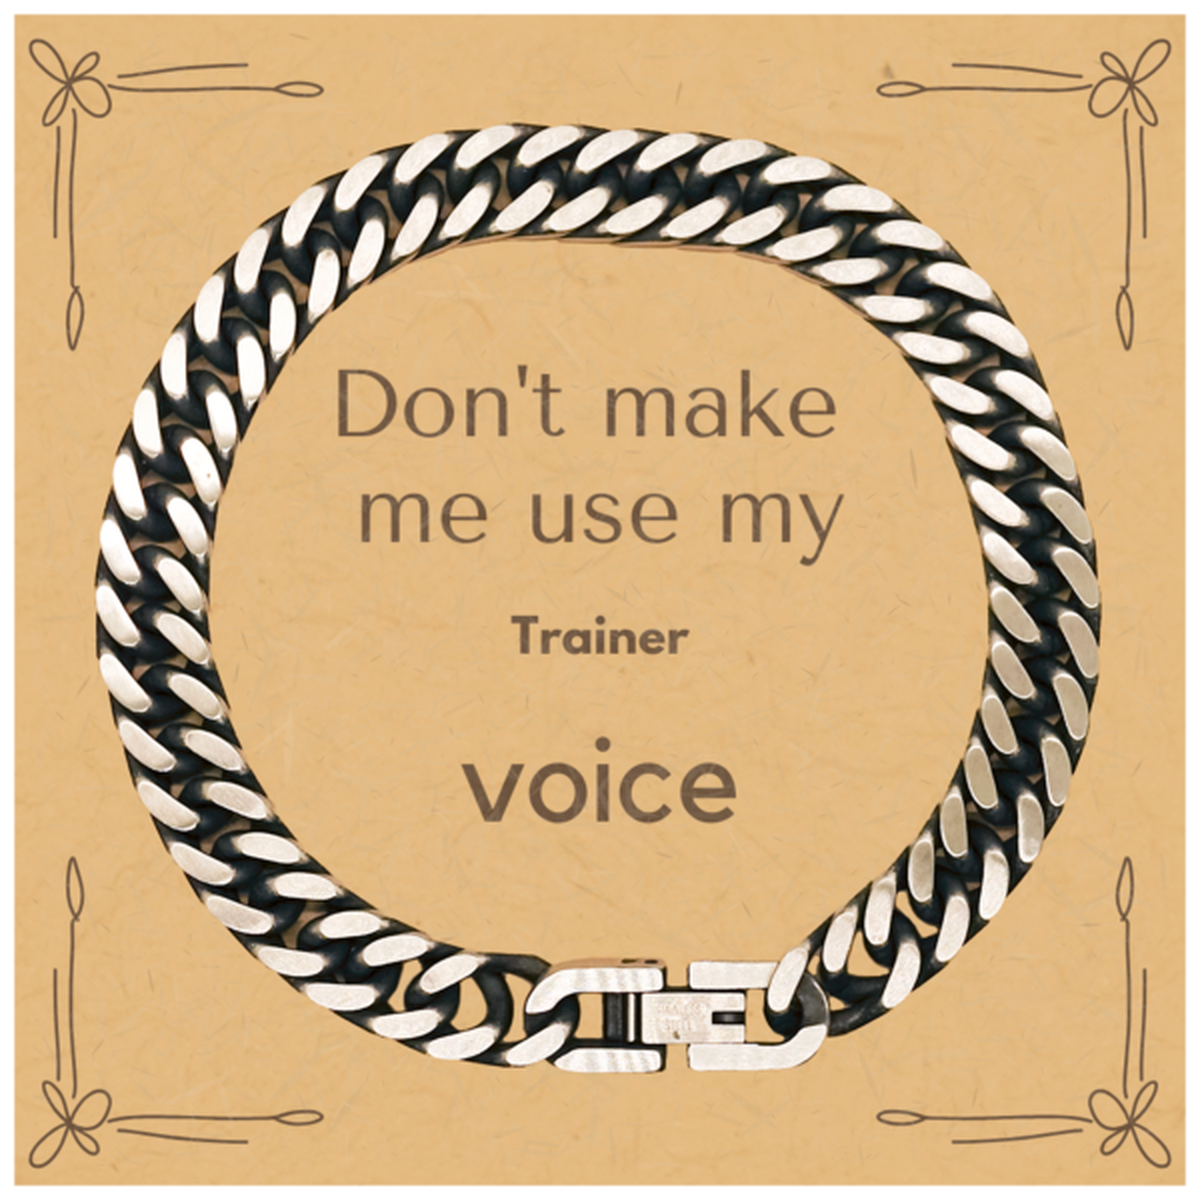 Don't make me use my Trainer voice, Sarcasm Trainer Card Gifts, Christmas Trainer Cuban Link Chain Bracelet Birthday Unique Gifts For Trainer Coworkers, Men, Women, Colleague, Friends